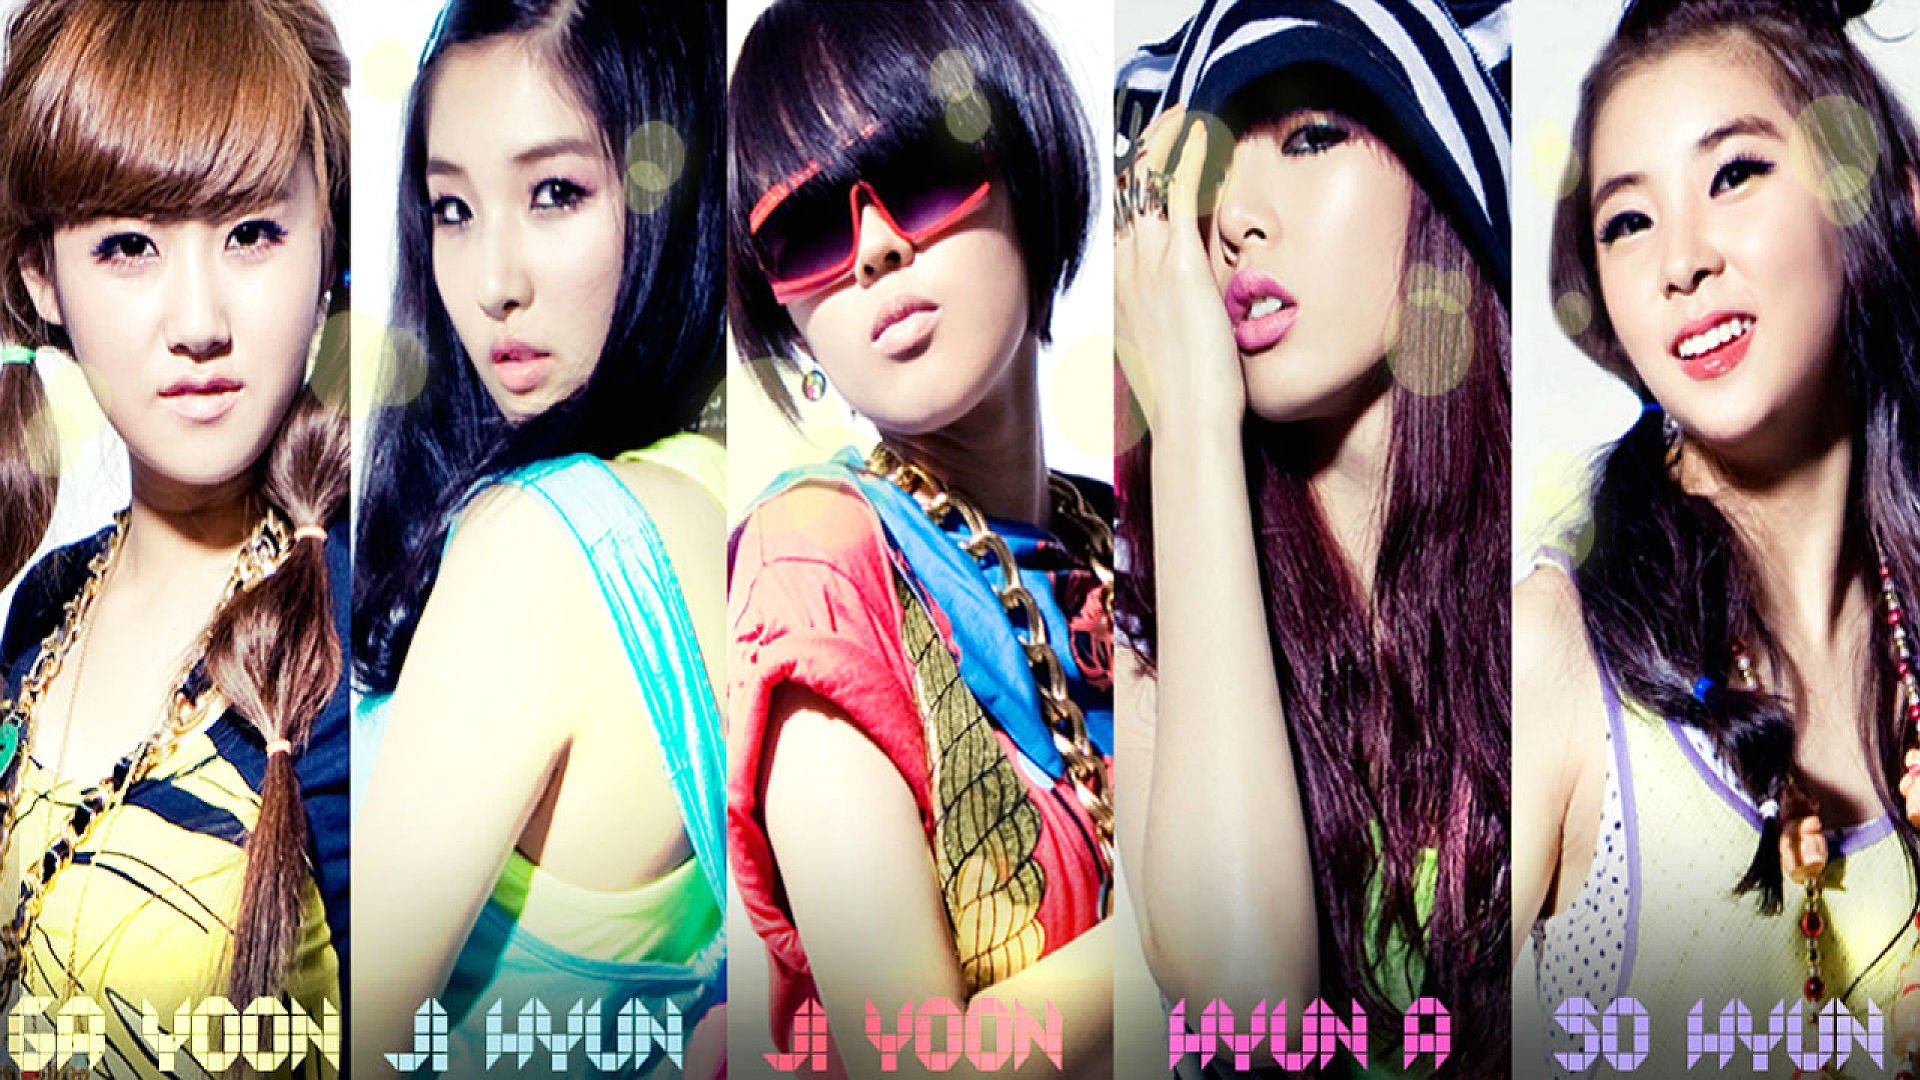 4minute wallpapers | WallpaperUP